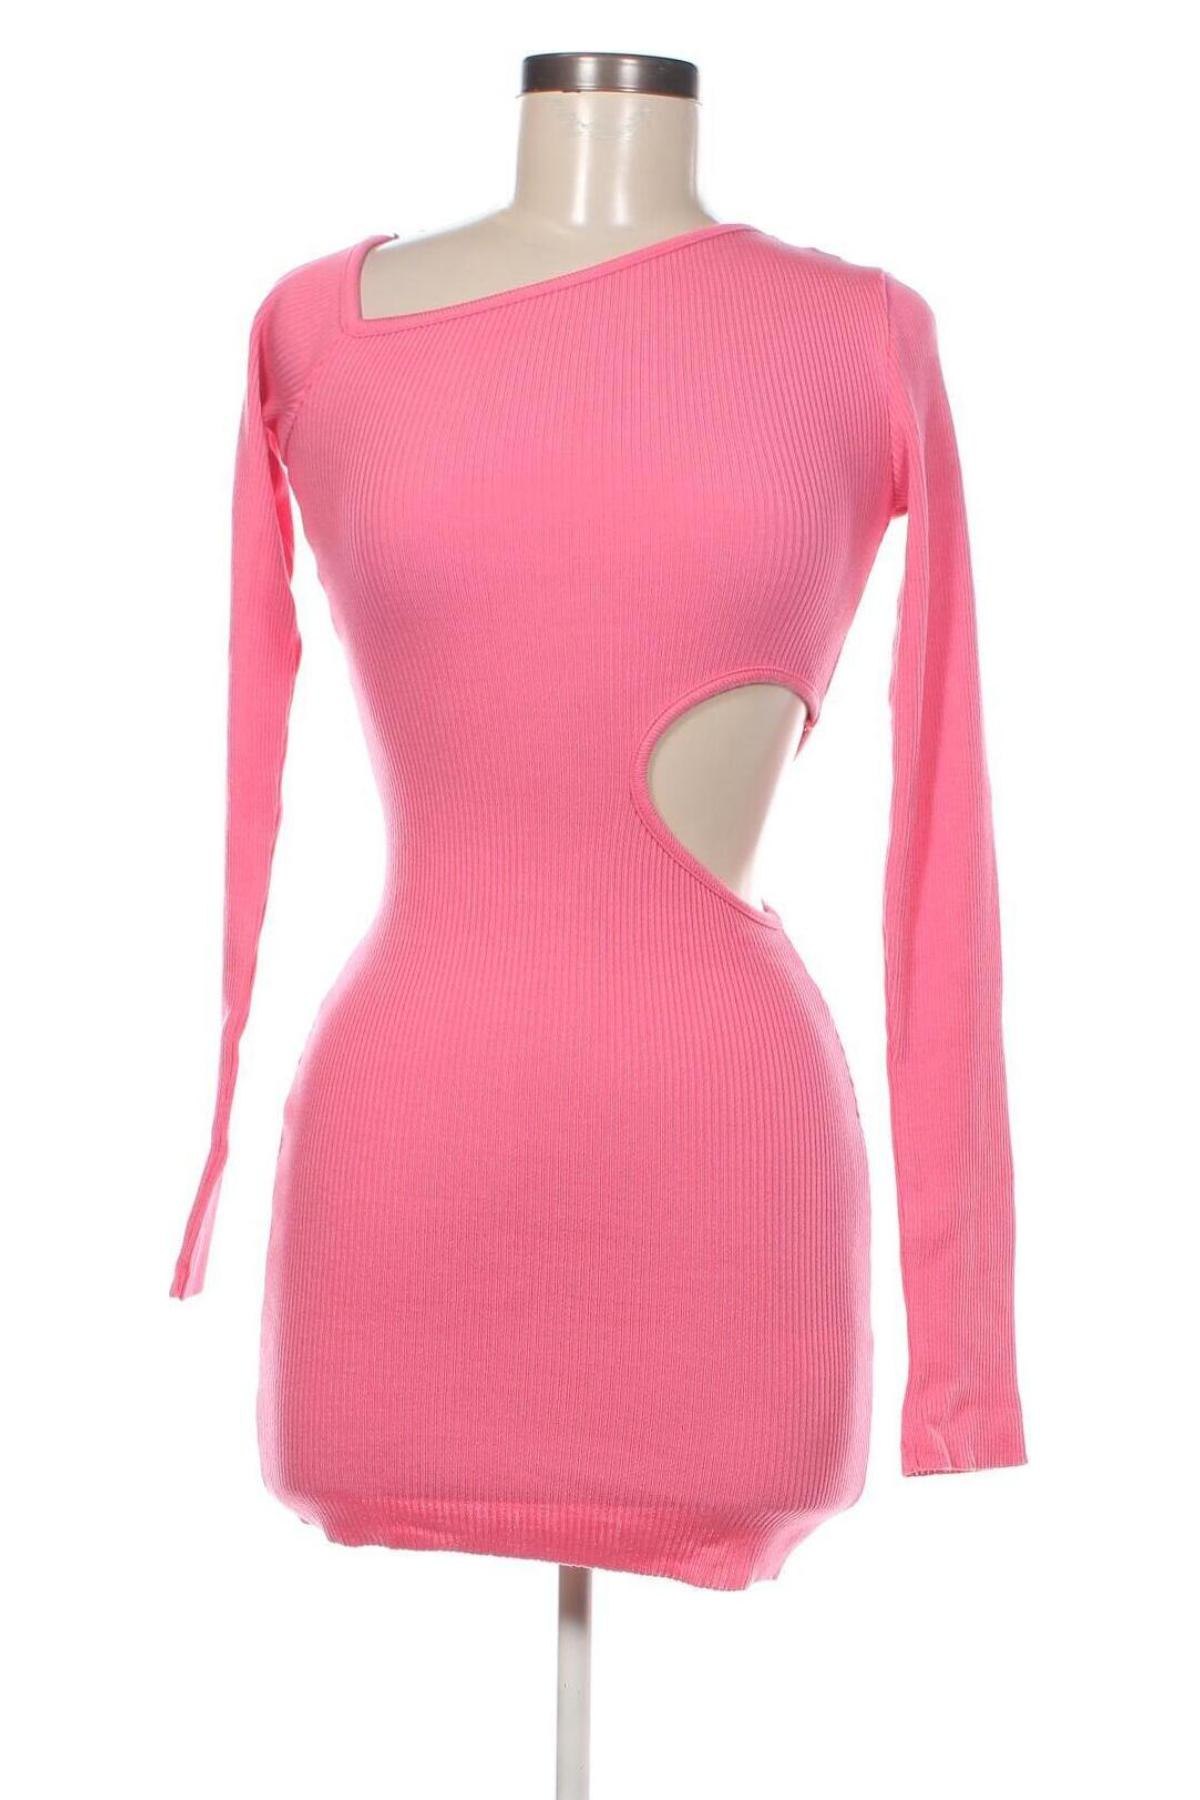 Kleid LeGer By Lena Gercke X About you, Größe S, Farbe Rosa, Preis 18,37 €